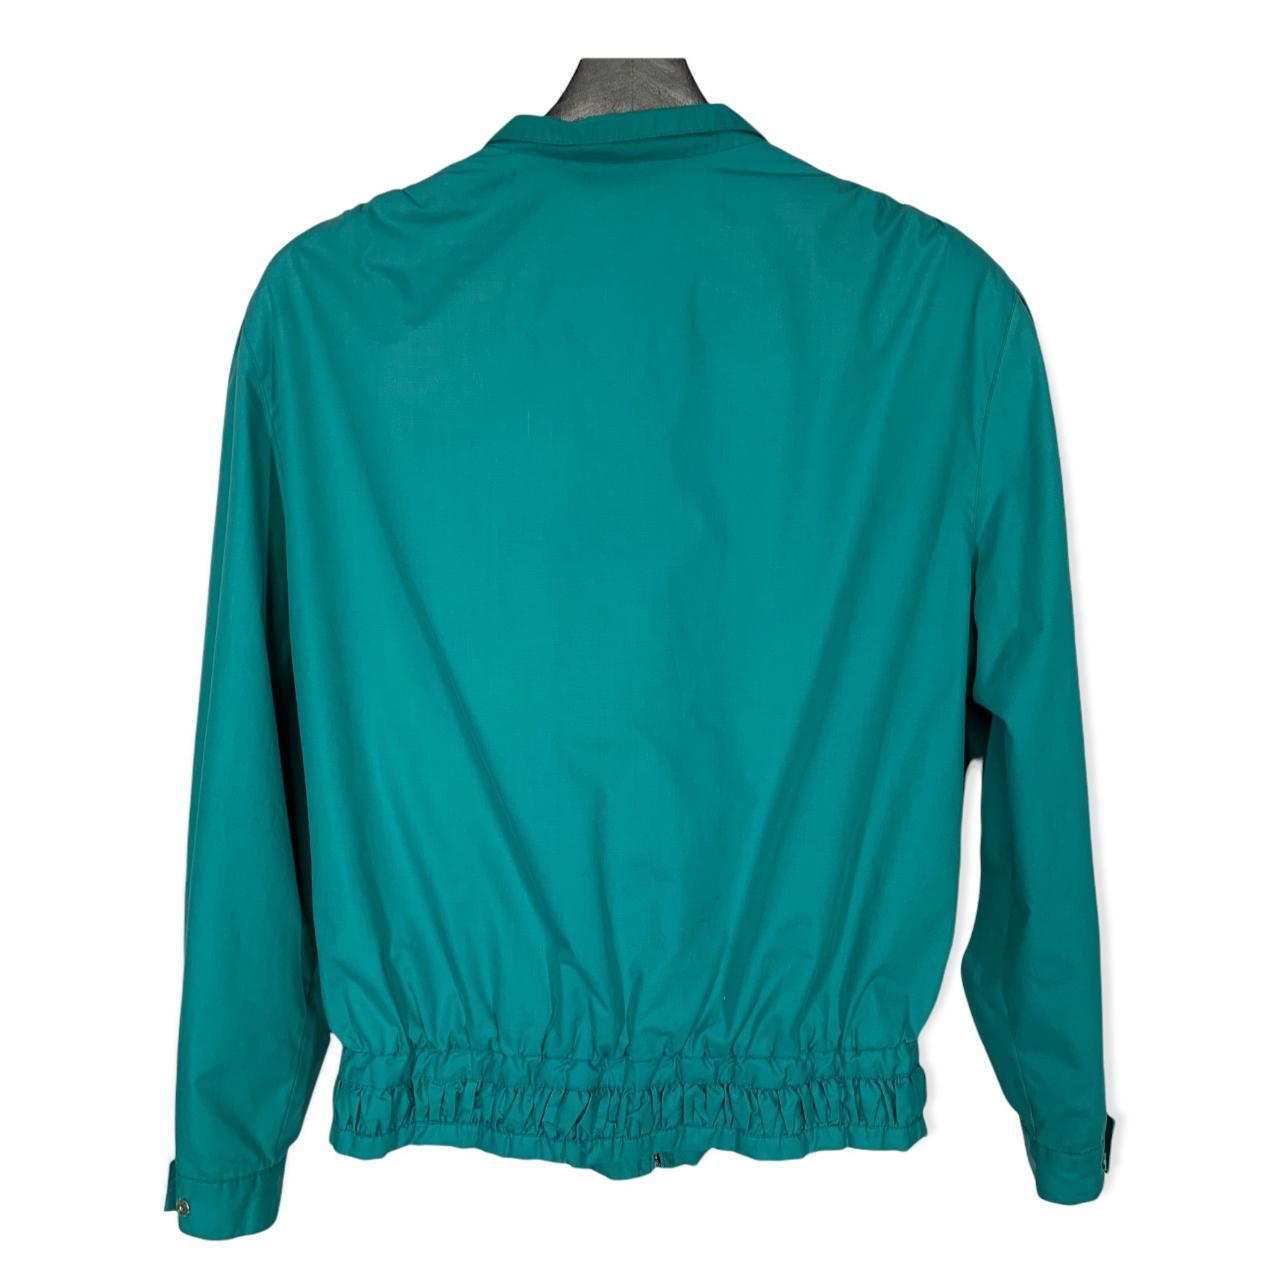 Product Image 2 - Vintage 80s Turquoise Members Only